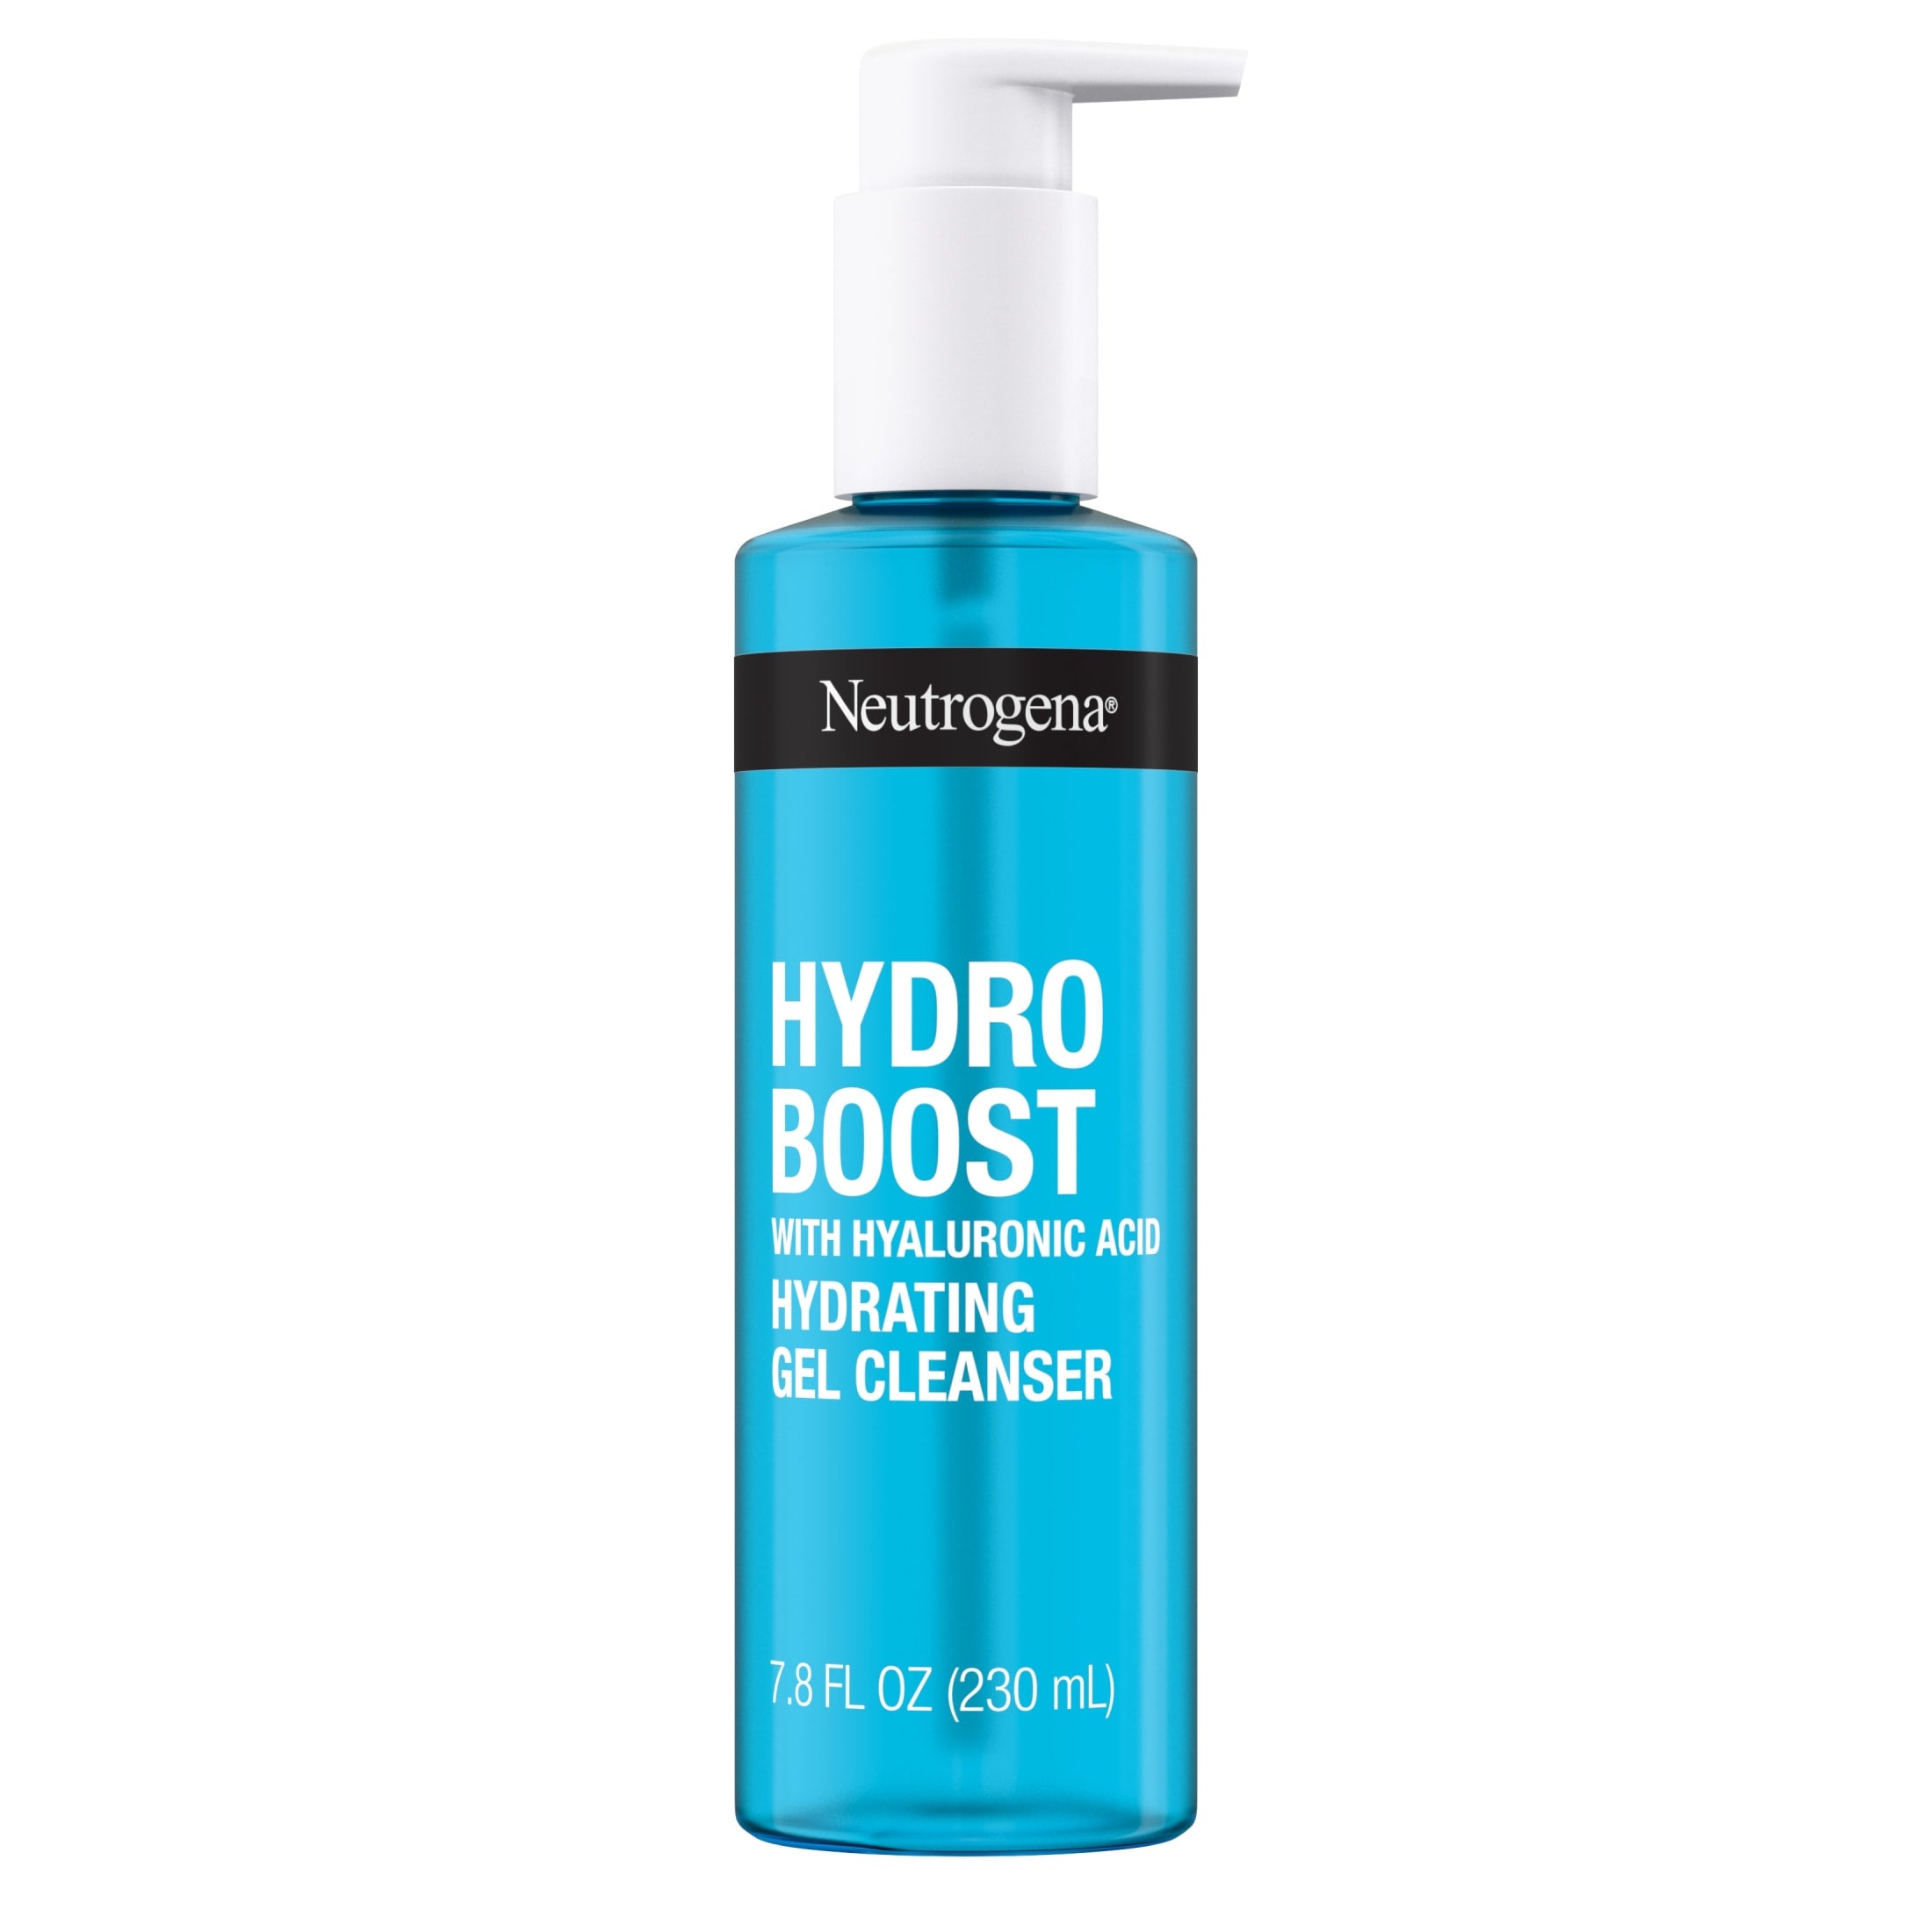 Neutrogena Hydro Boost Hydrating Hyaluronic Acid Gel Facial Cleanser and Face Wash, 7.8 oz | MTTS280